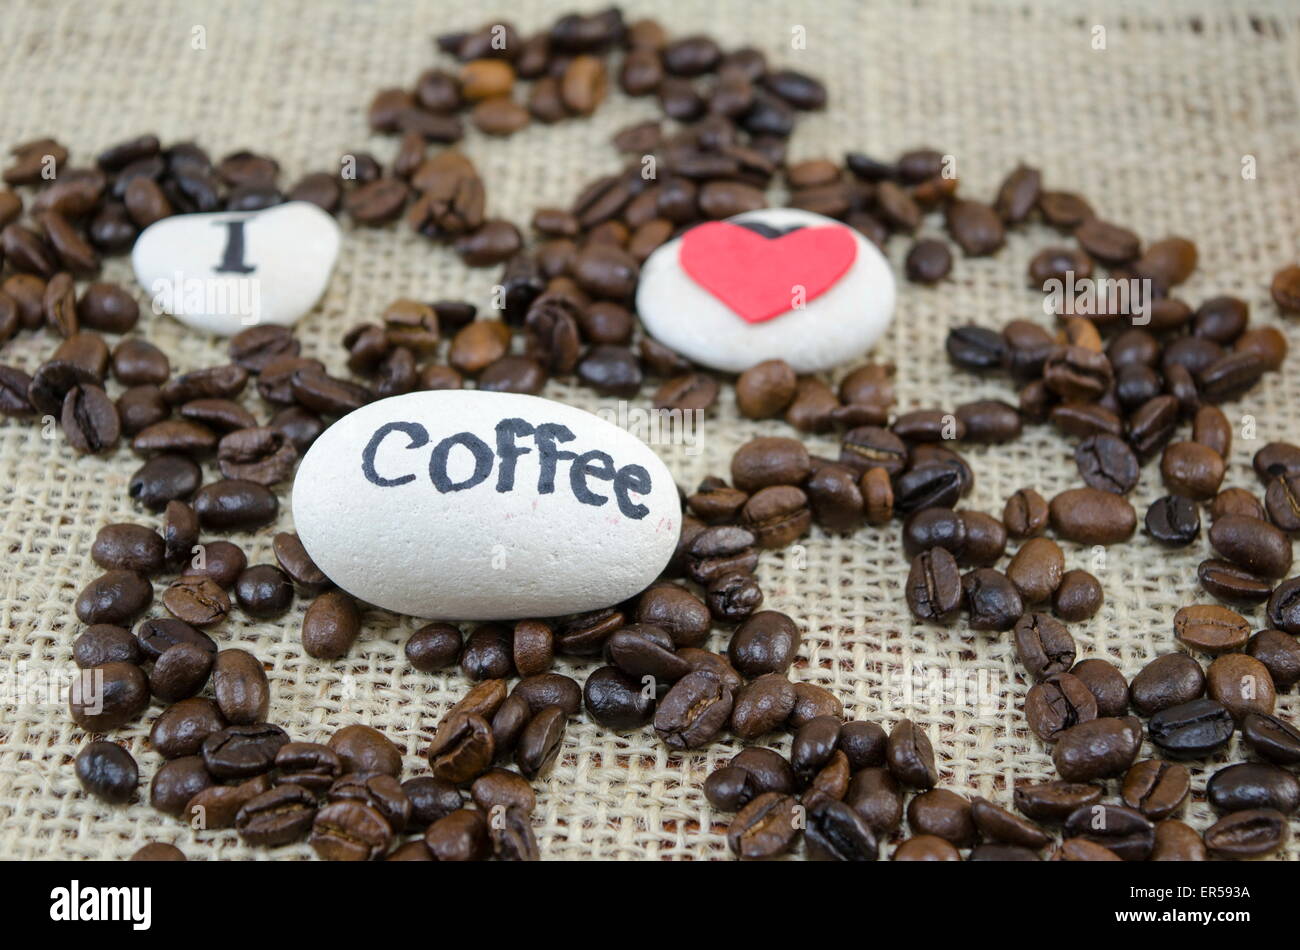 Roasted coffee beans with a 'I love coffee' message on a vintage tablecloth Stock Photo